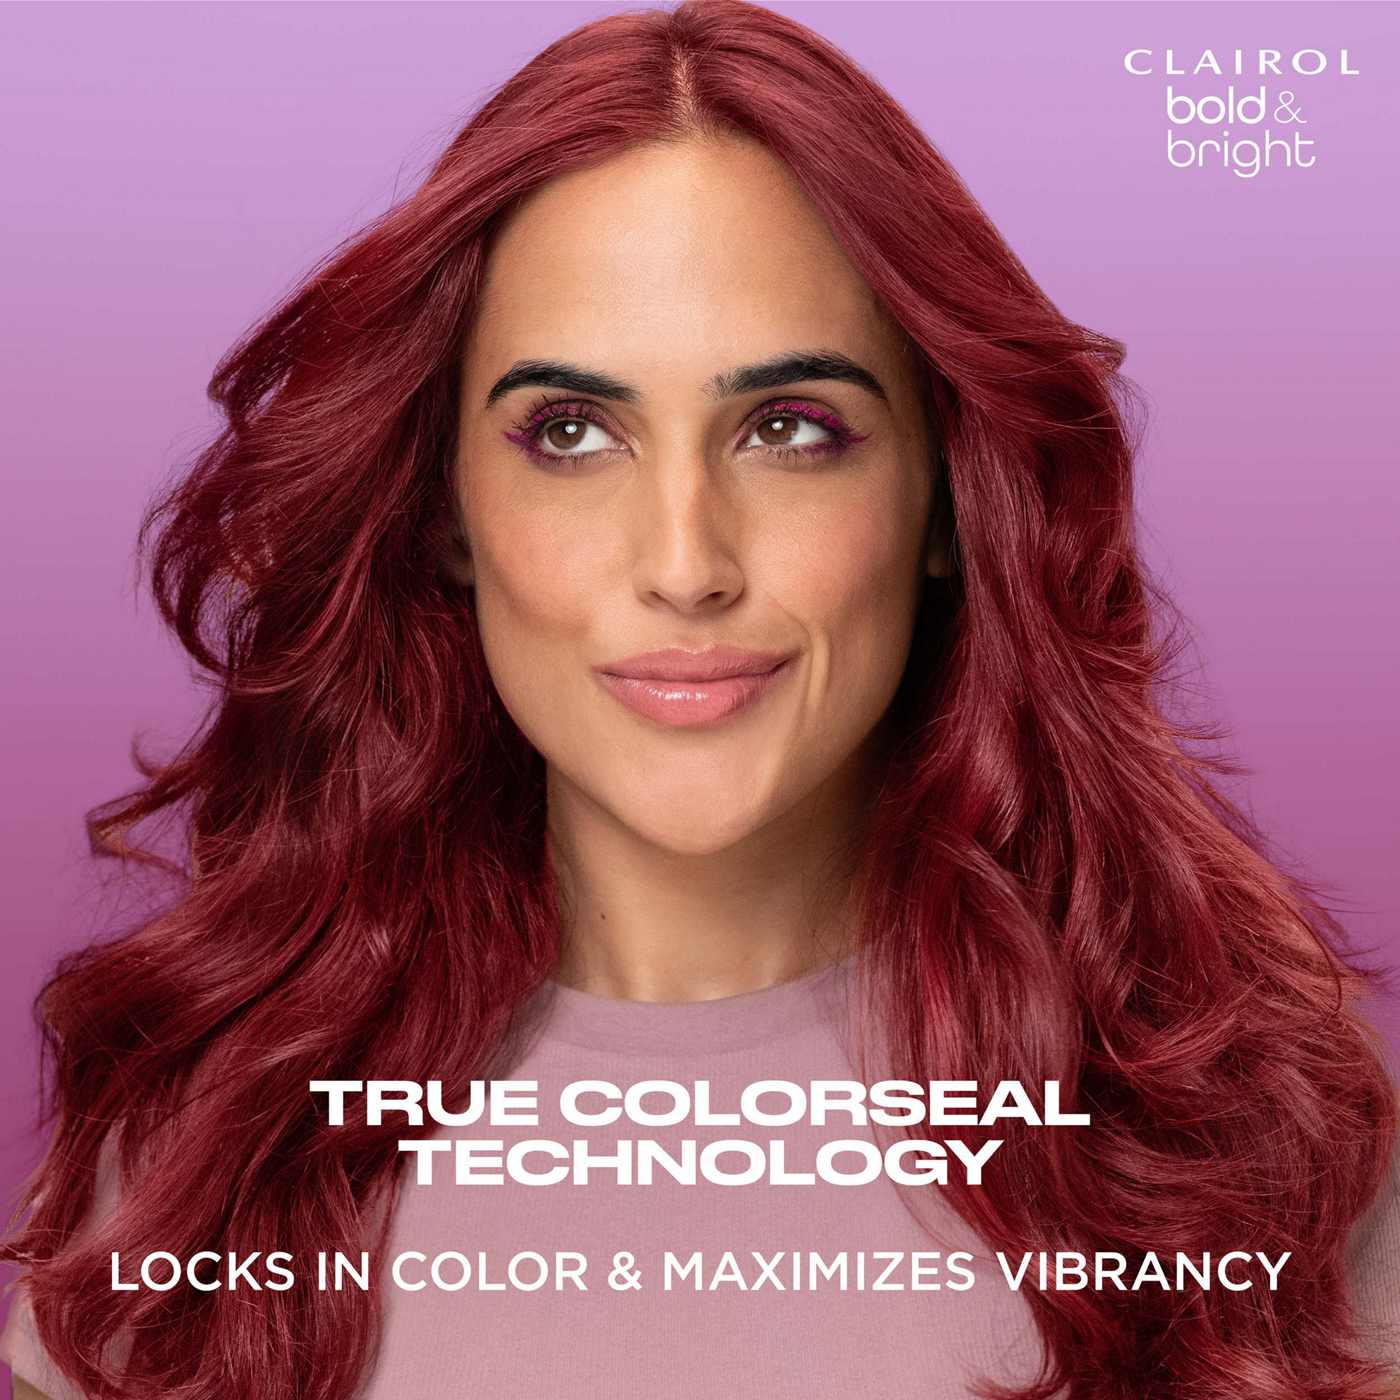 Clairol Bold & Bright Permanent Hair Color - R6 Intense Cherry; image 5 of 11